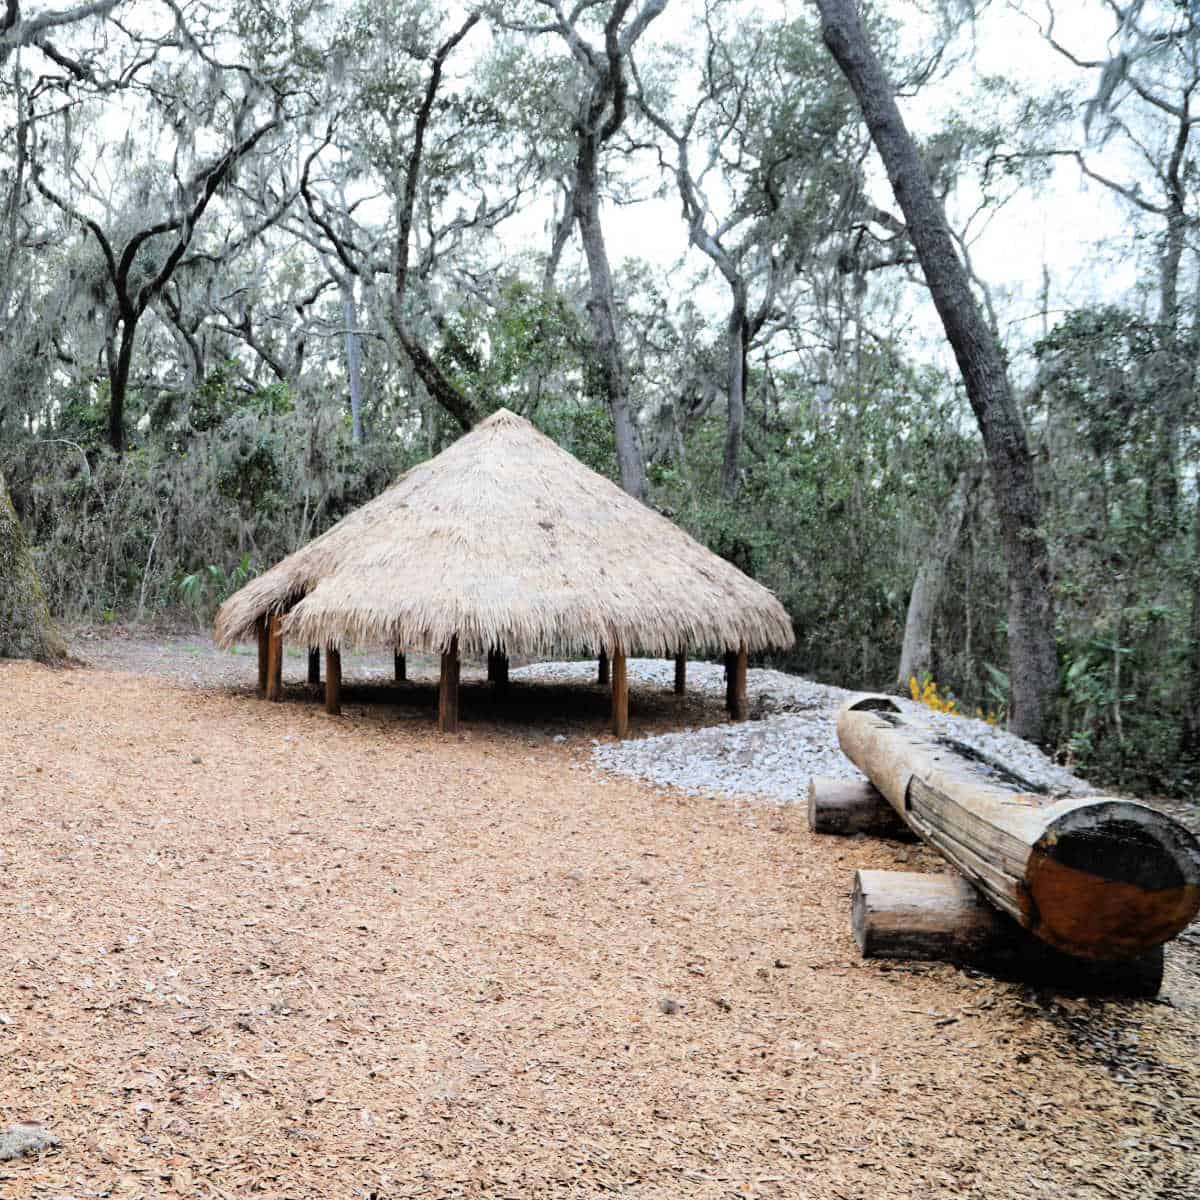 low thatch covered hut next to a shell area and trees